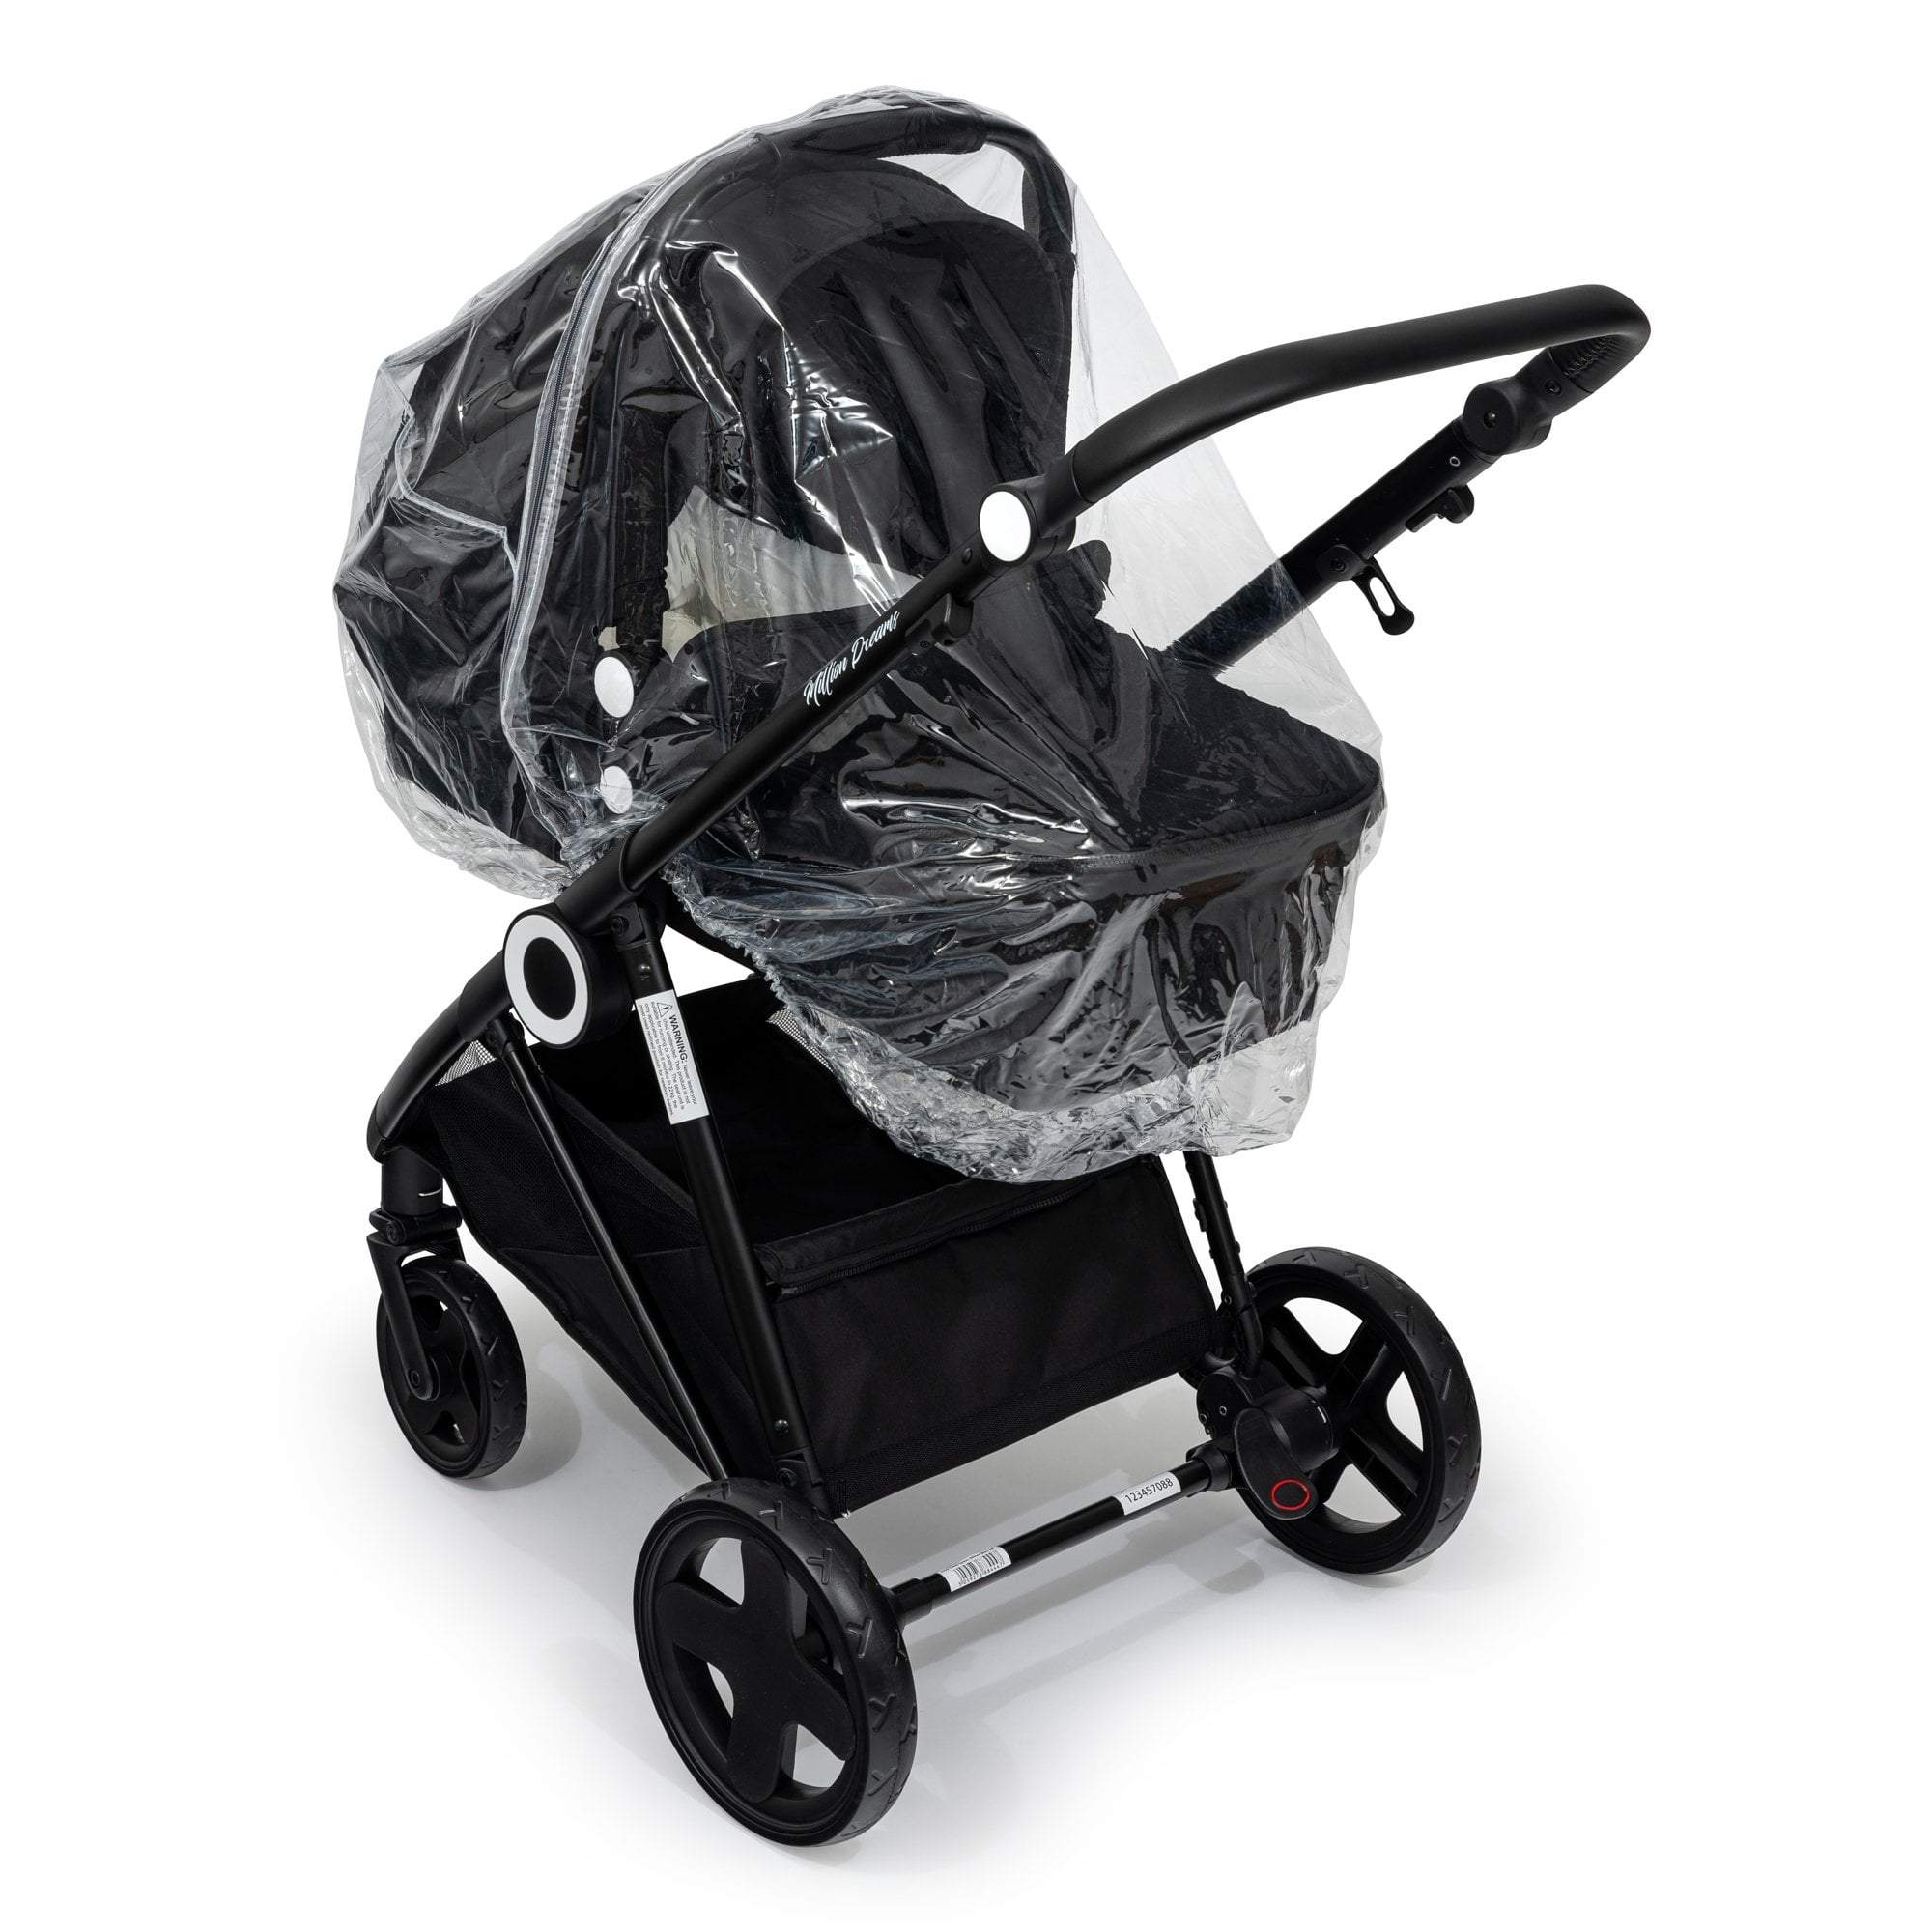 Carrycot Raincover Compatible With Graco - Fits All Models - For Your Little One